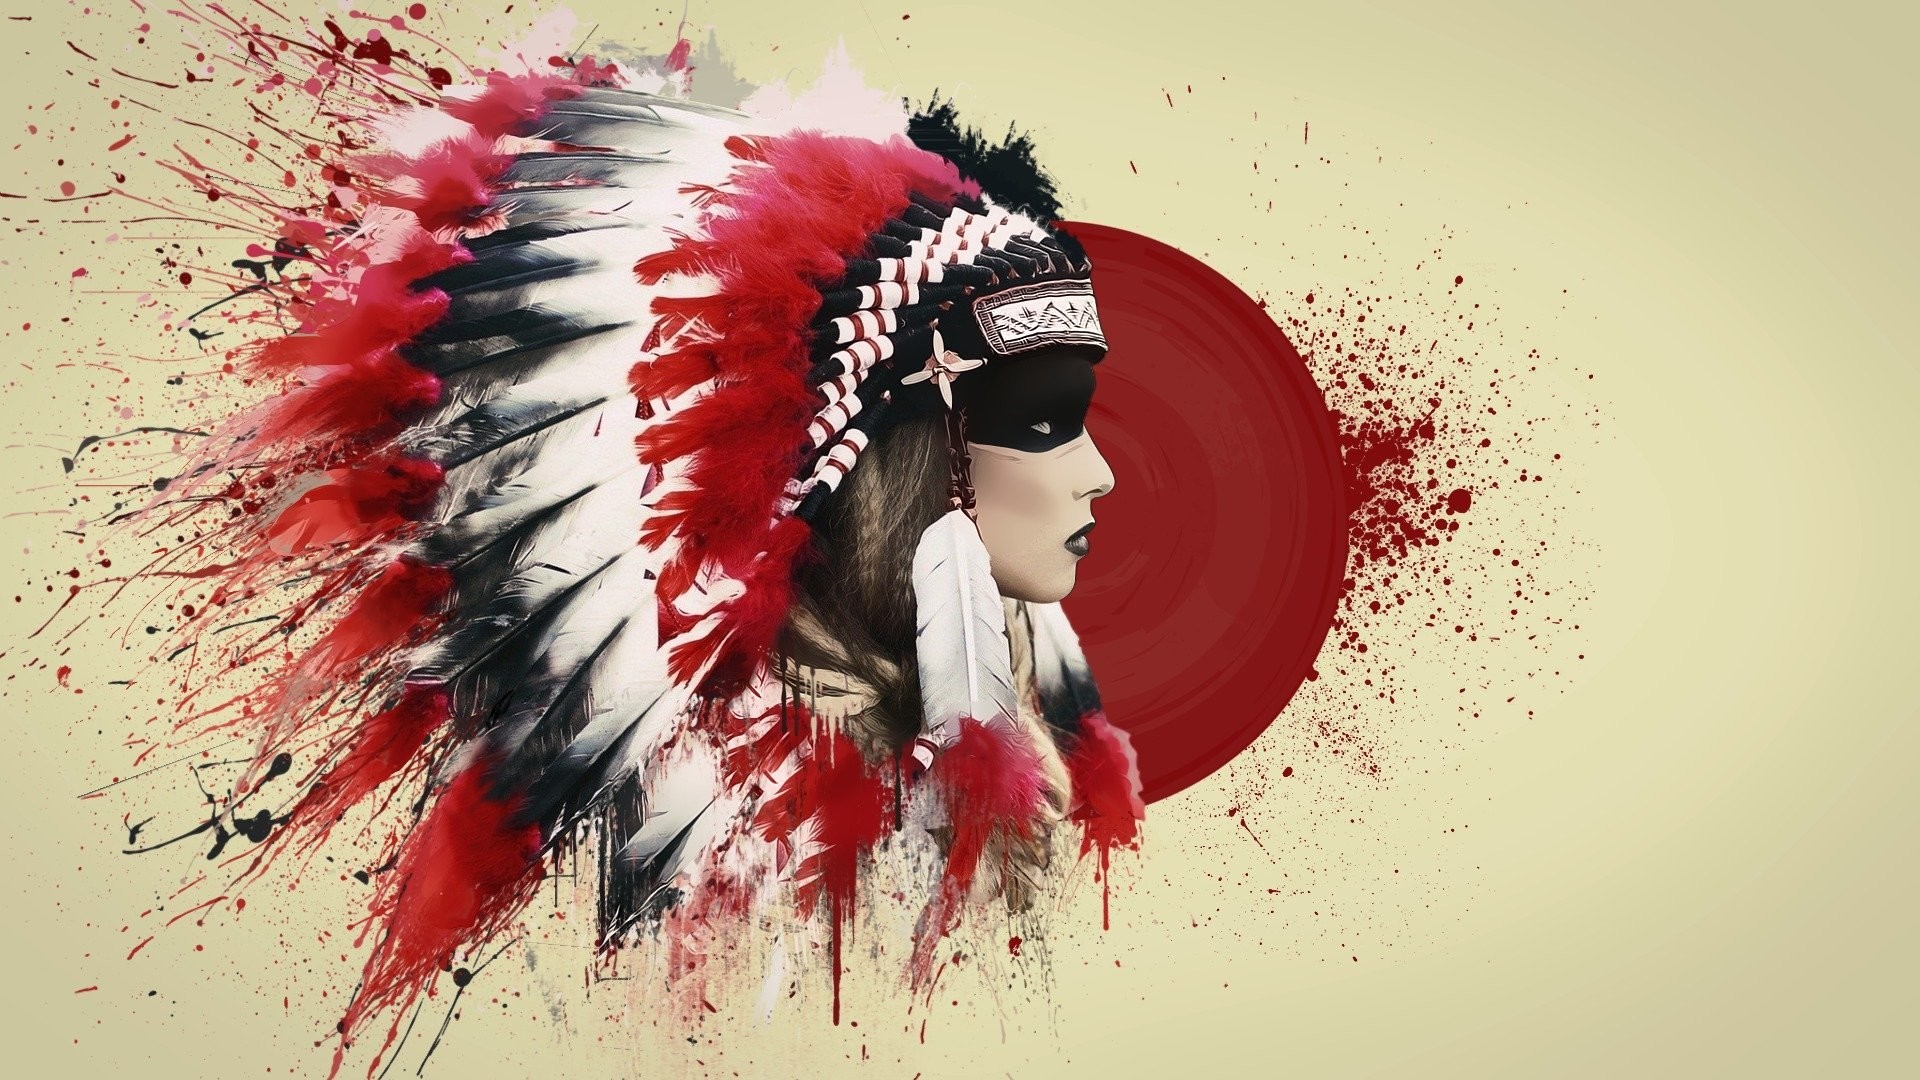 1920x1080 More wallpaper collections. 30 Wallpapers. red indian wallpaper